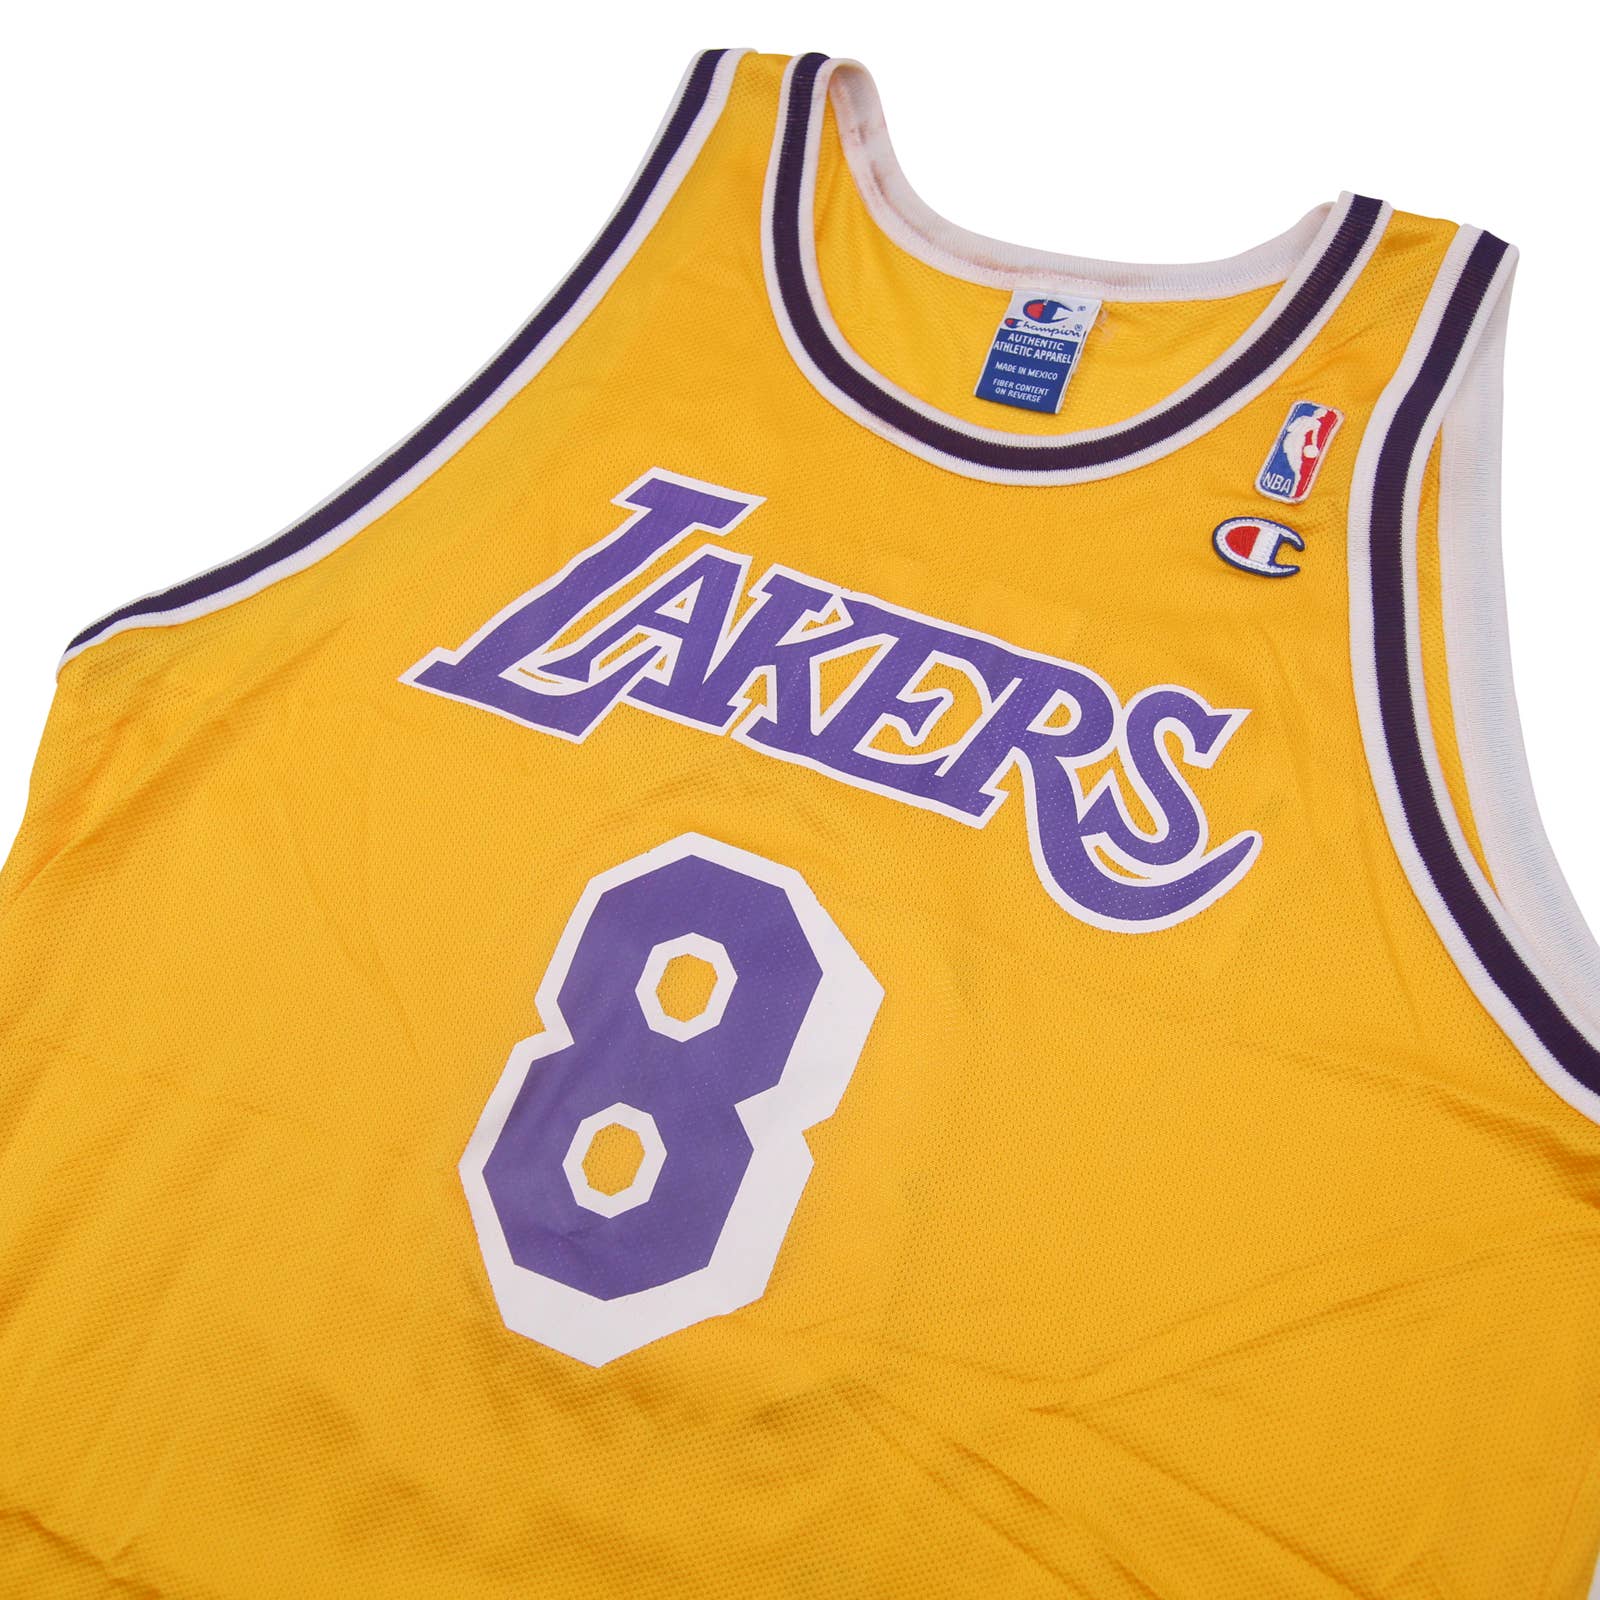 8 lakers jersey